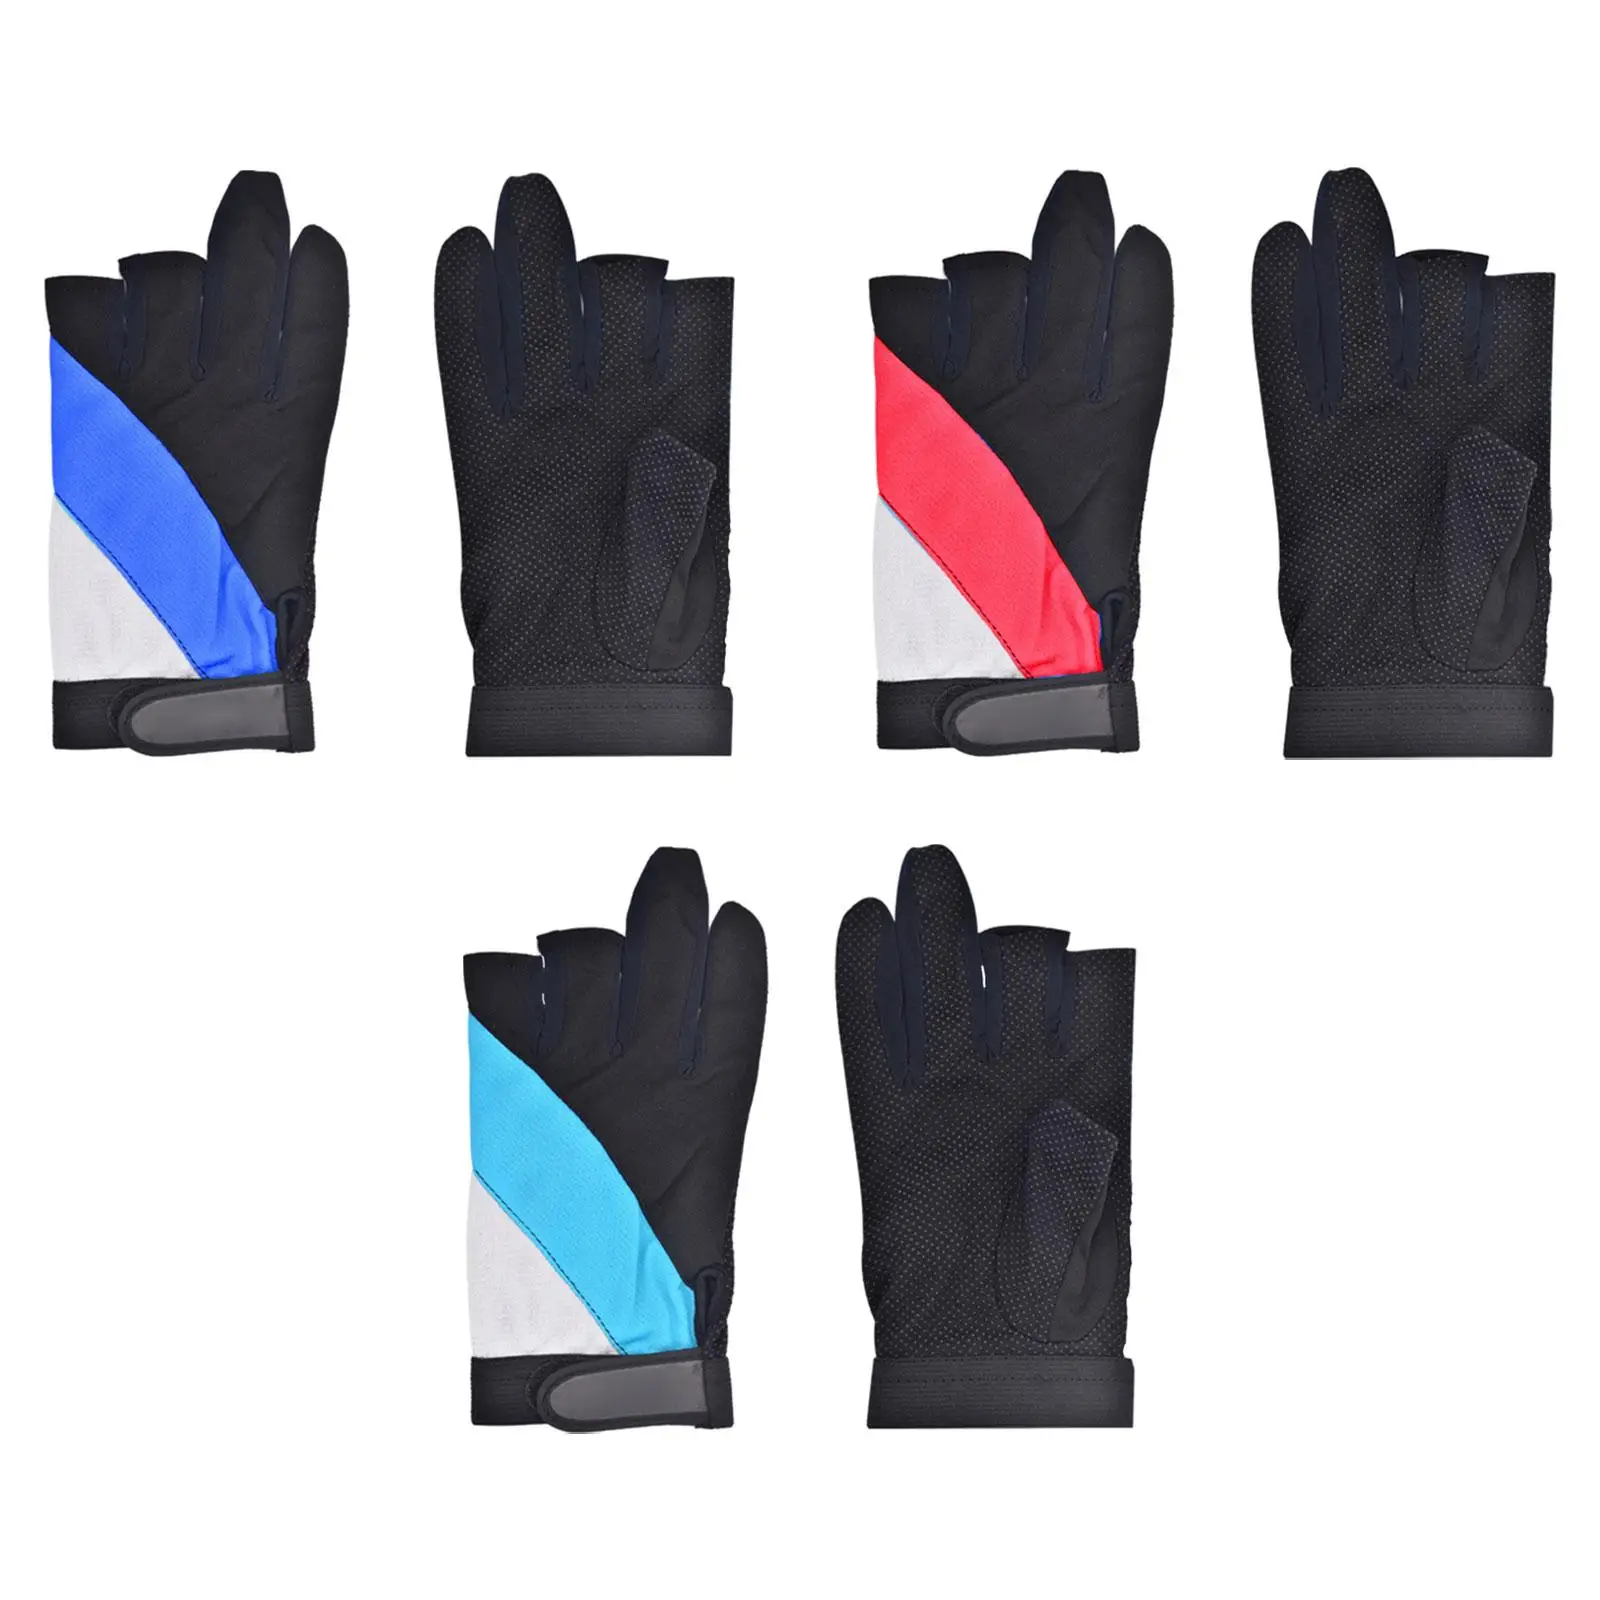 3 Cut Fingers Gloves Mittens Women Men Breathable Non Slip Cycling Gloves Finger Protector Gloves for Camping Outdoor Picnic